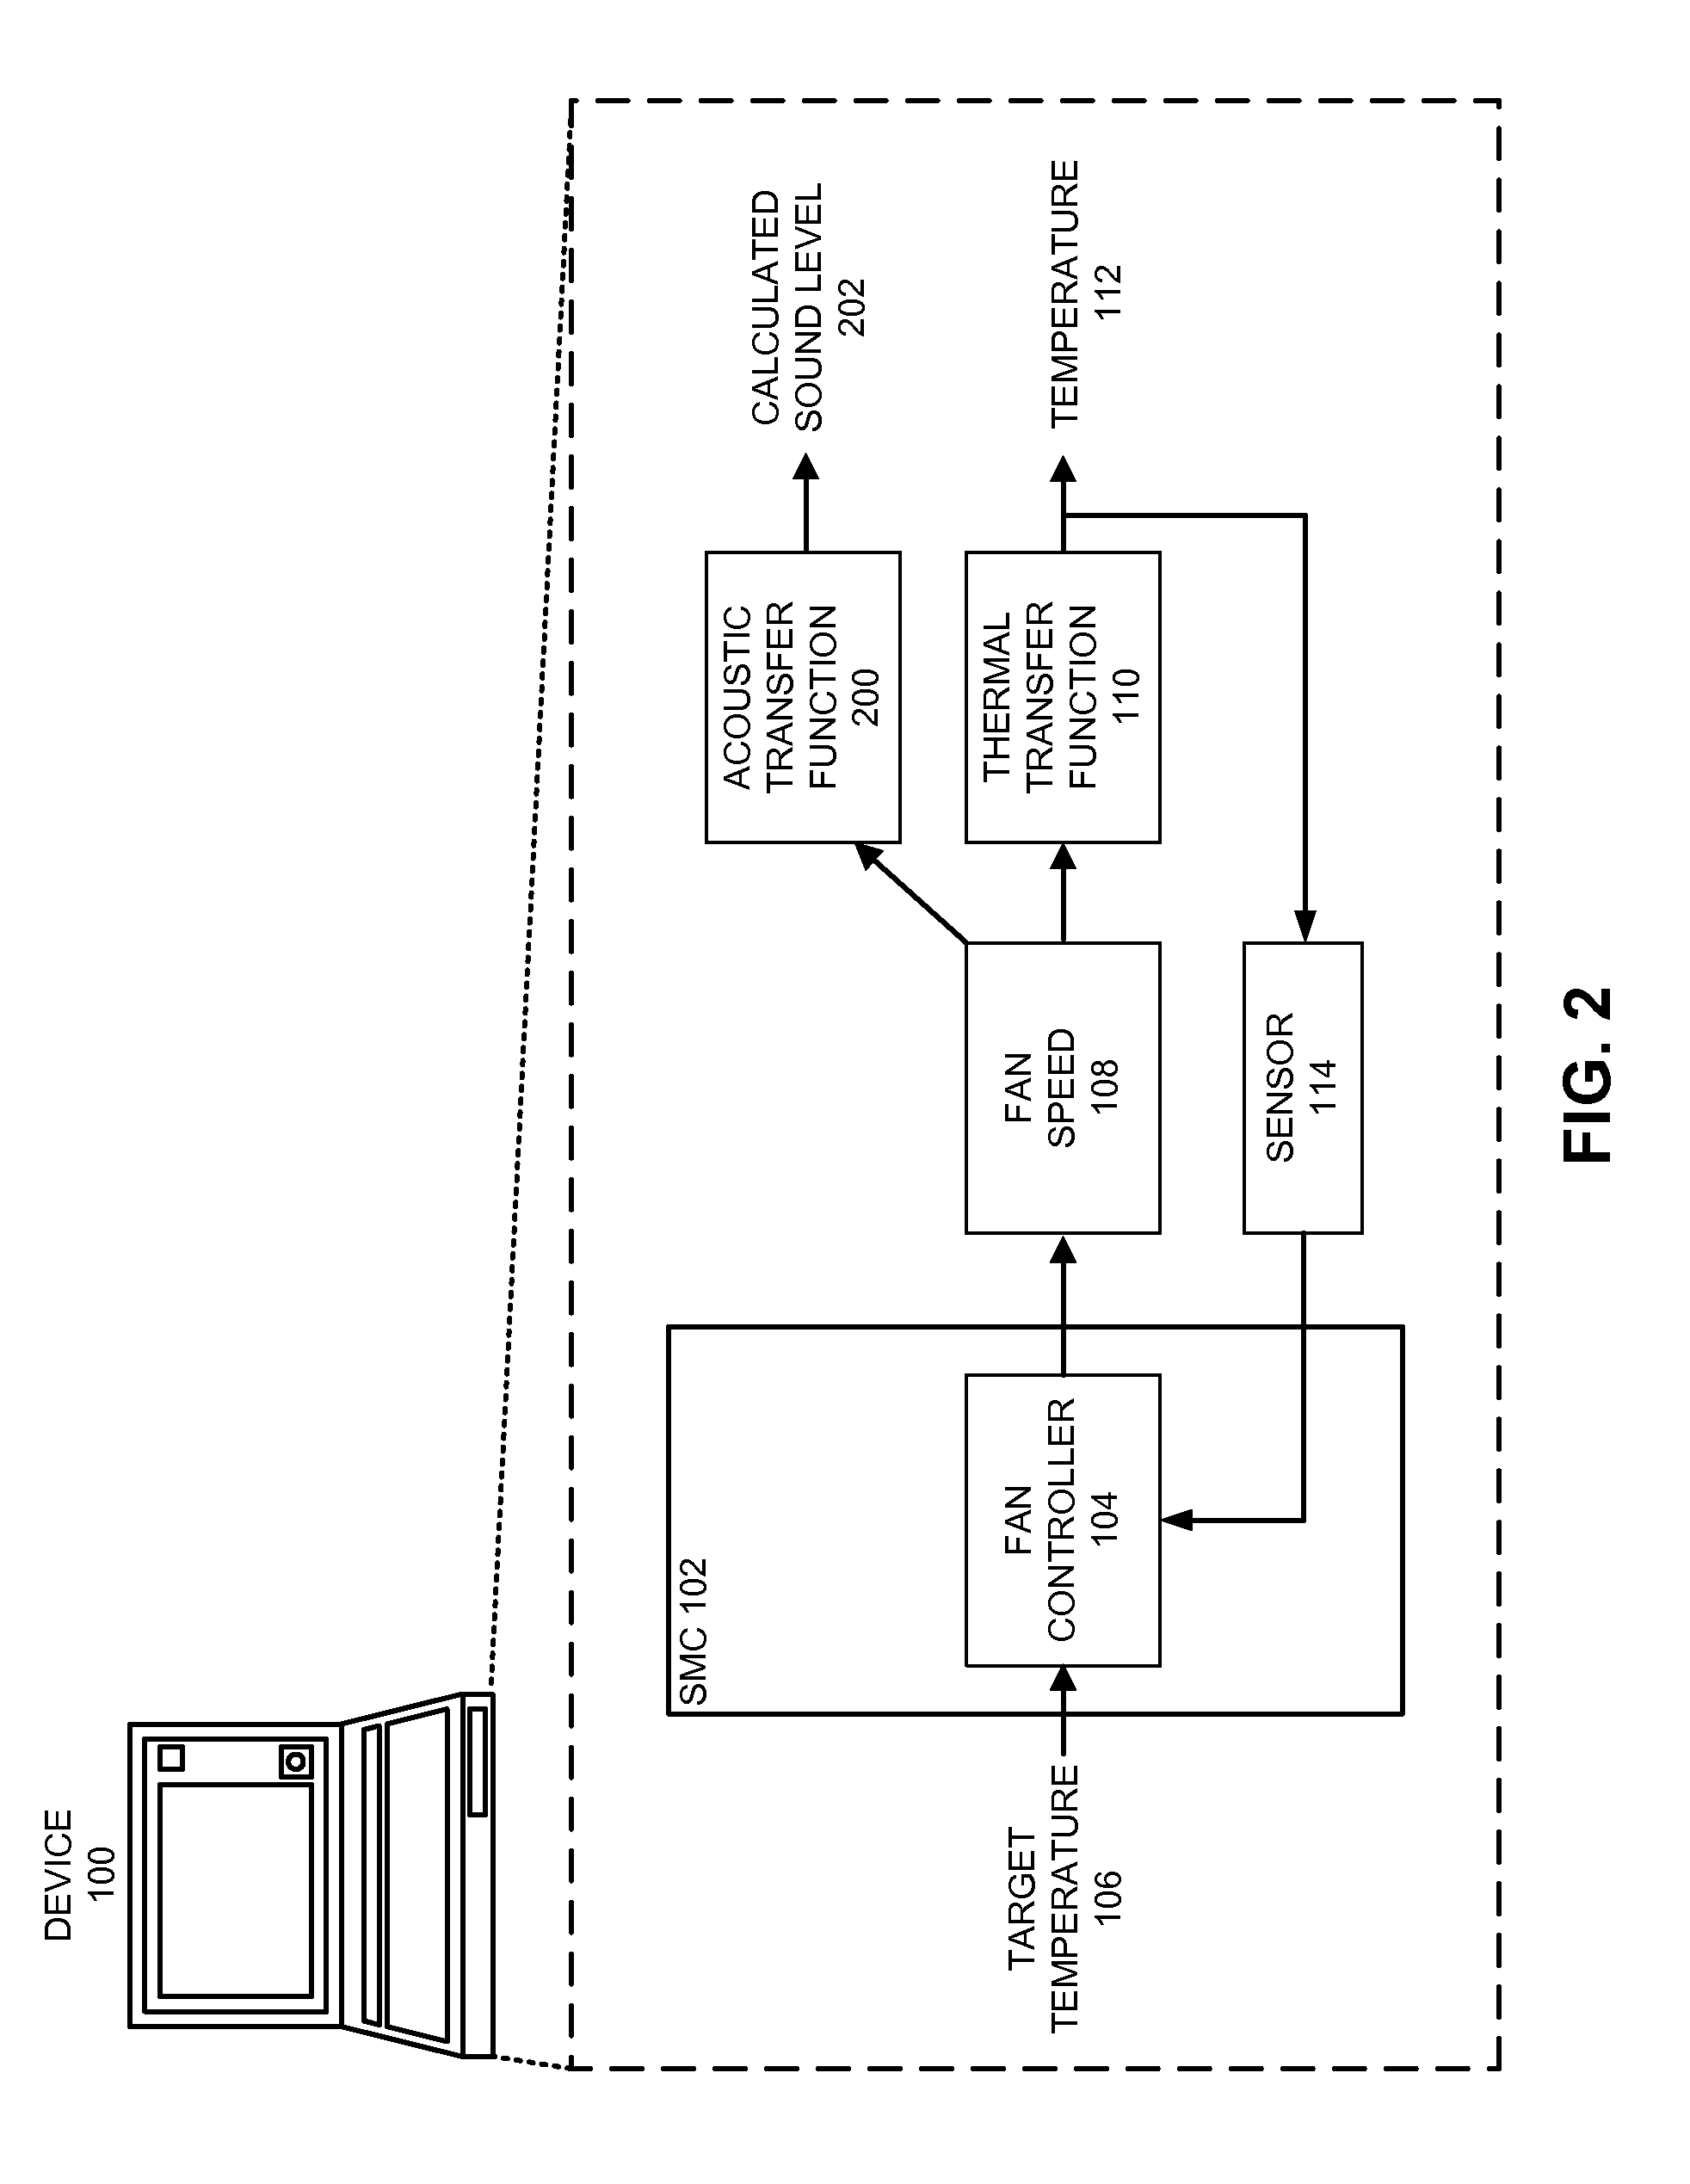 Reducing annoyance by managing the acoustic noise produced by a device